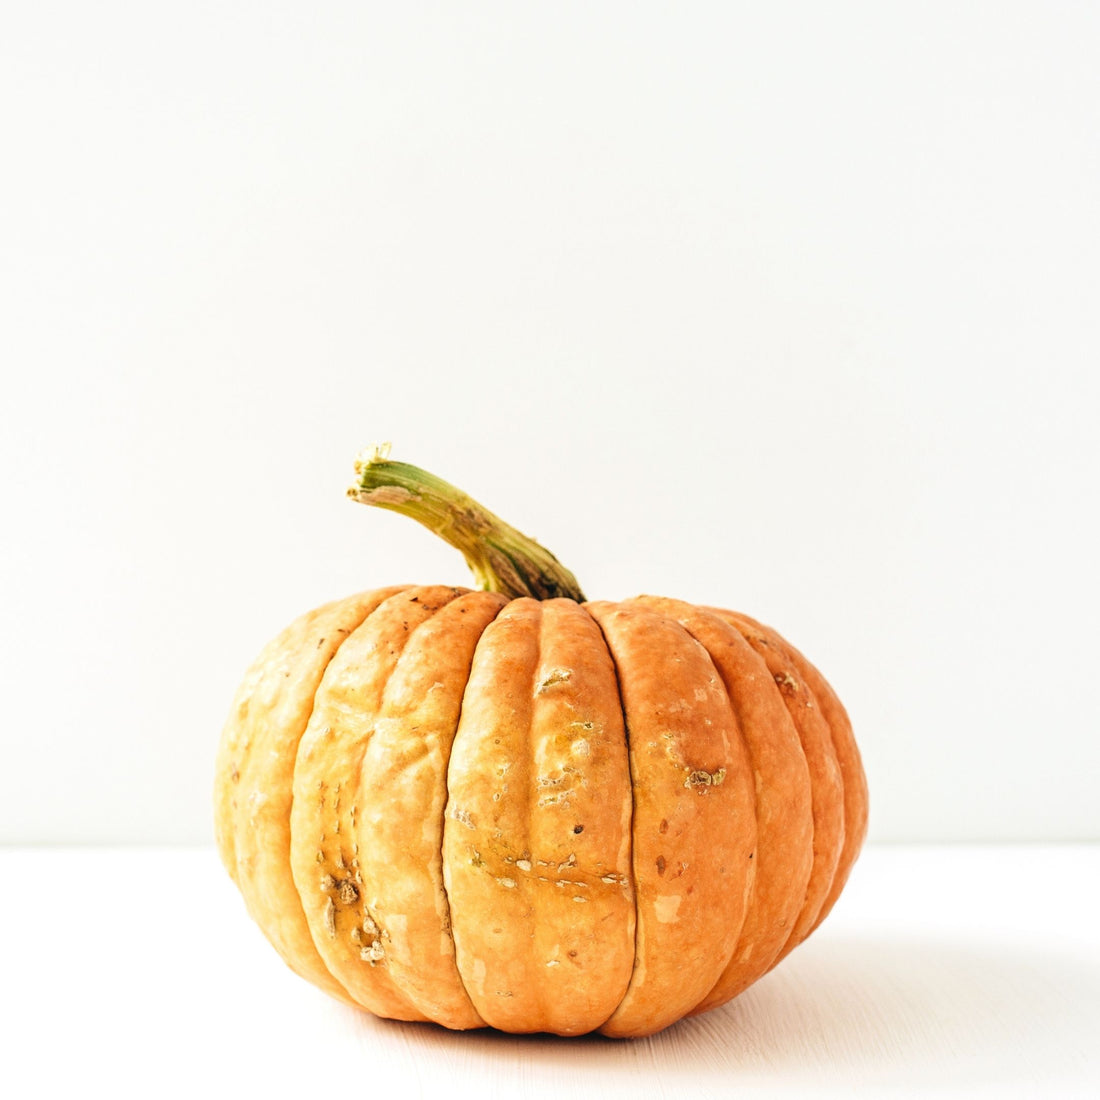 4 Simple Swaps for a Green Halloween